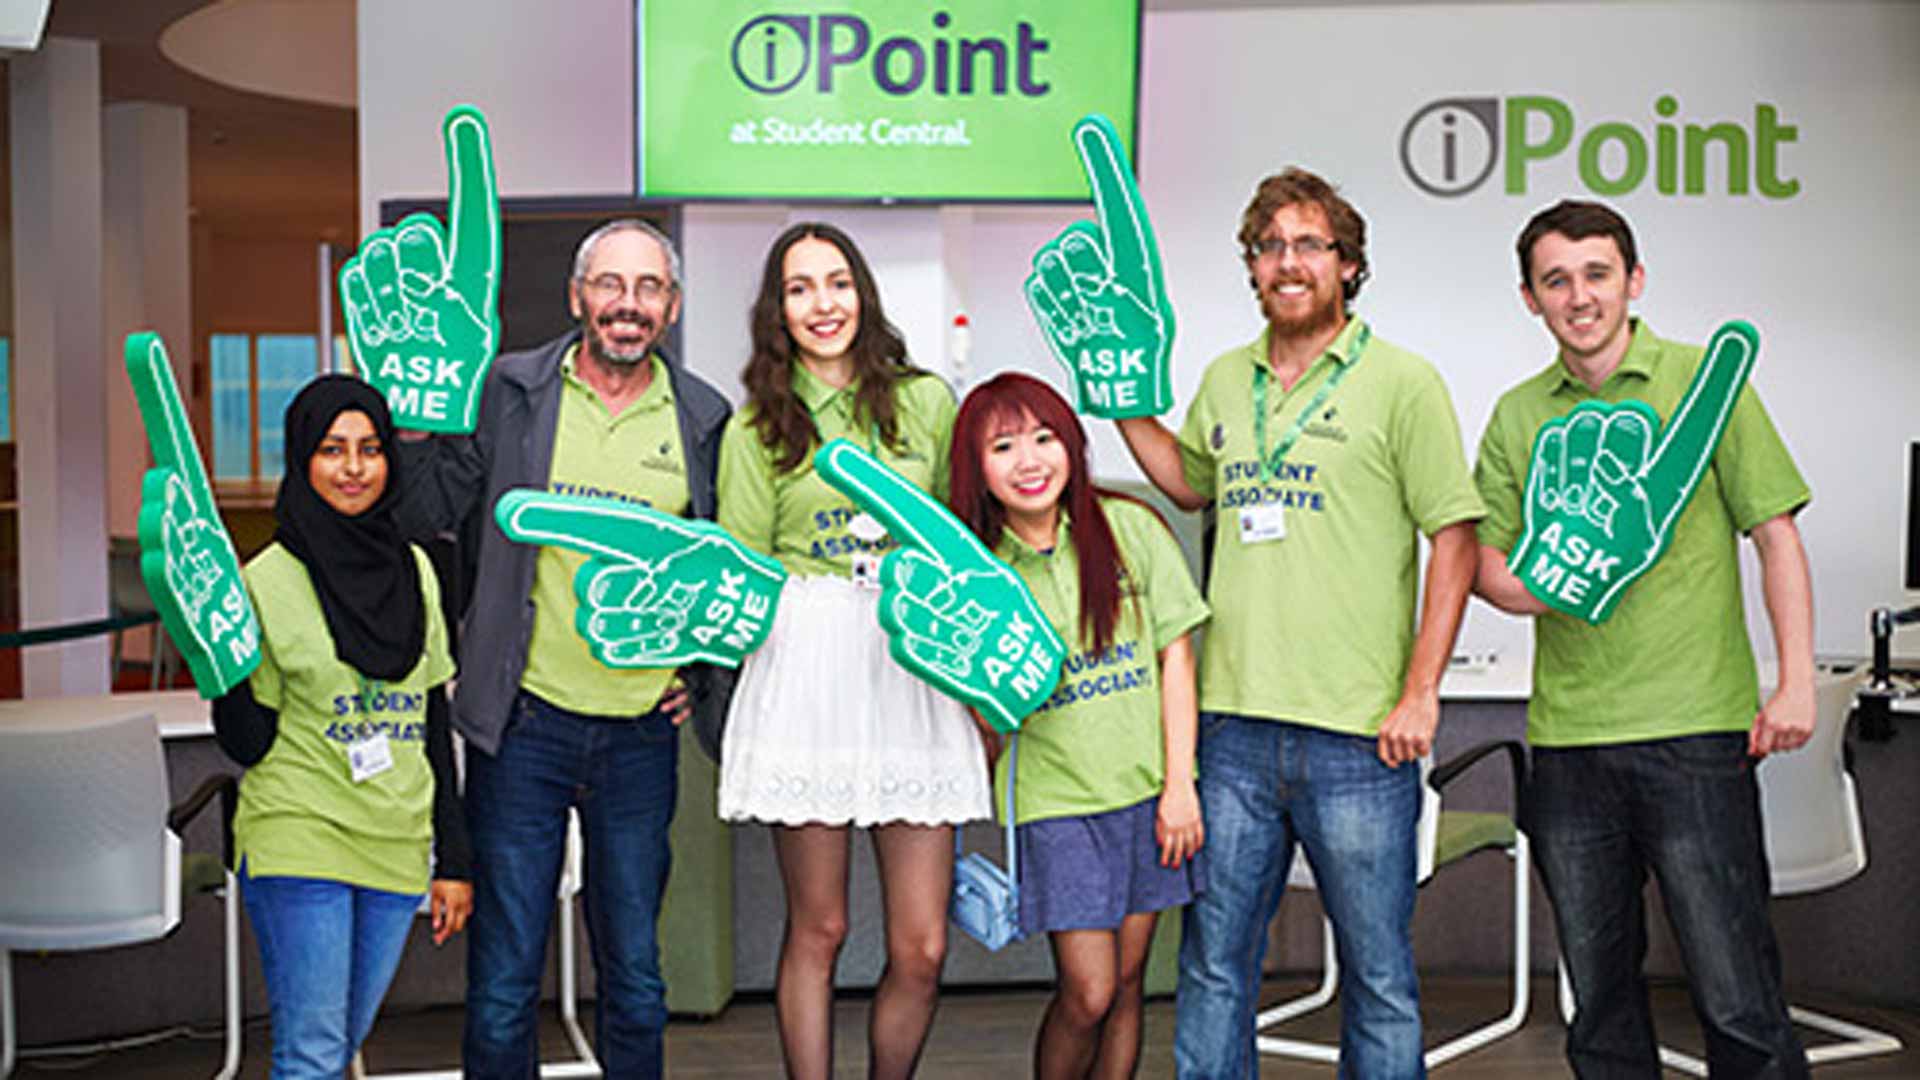 The iPoint desk in Student Central with its Customer Support Assistants holding 'Ask me' signs smiling.